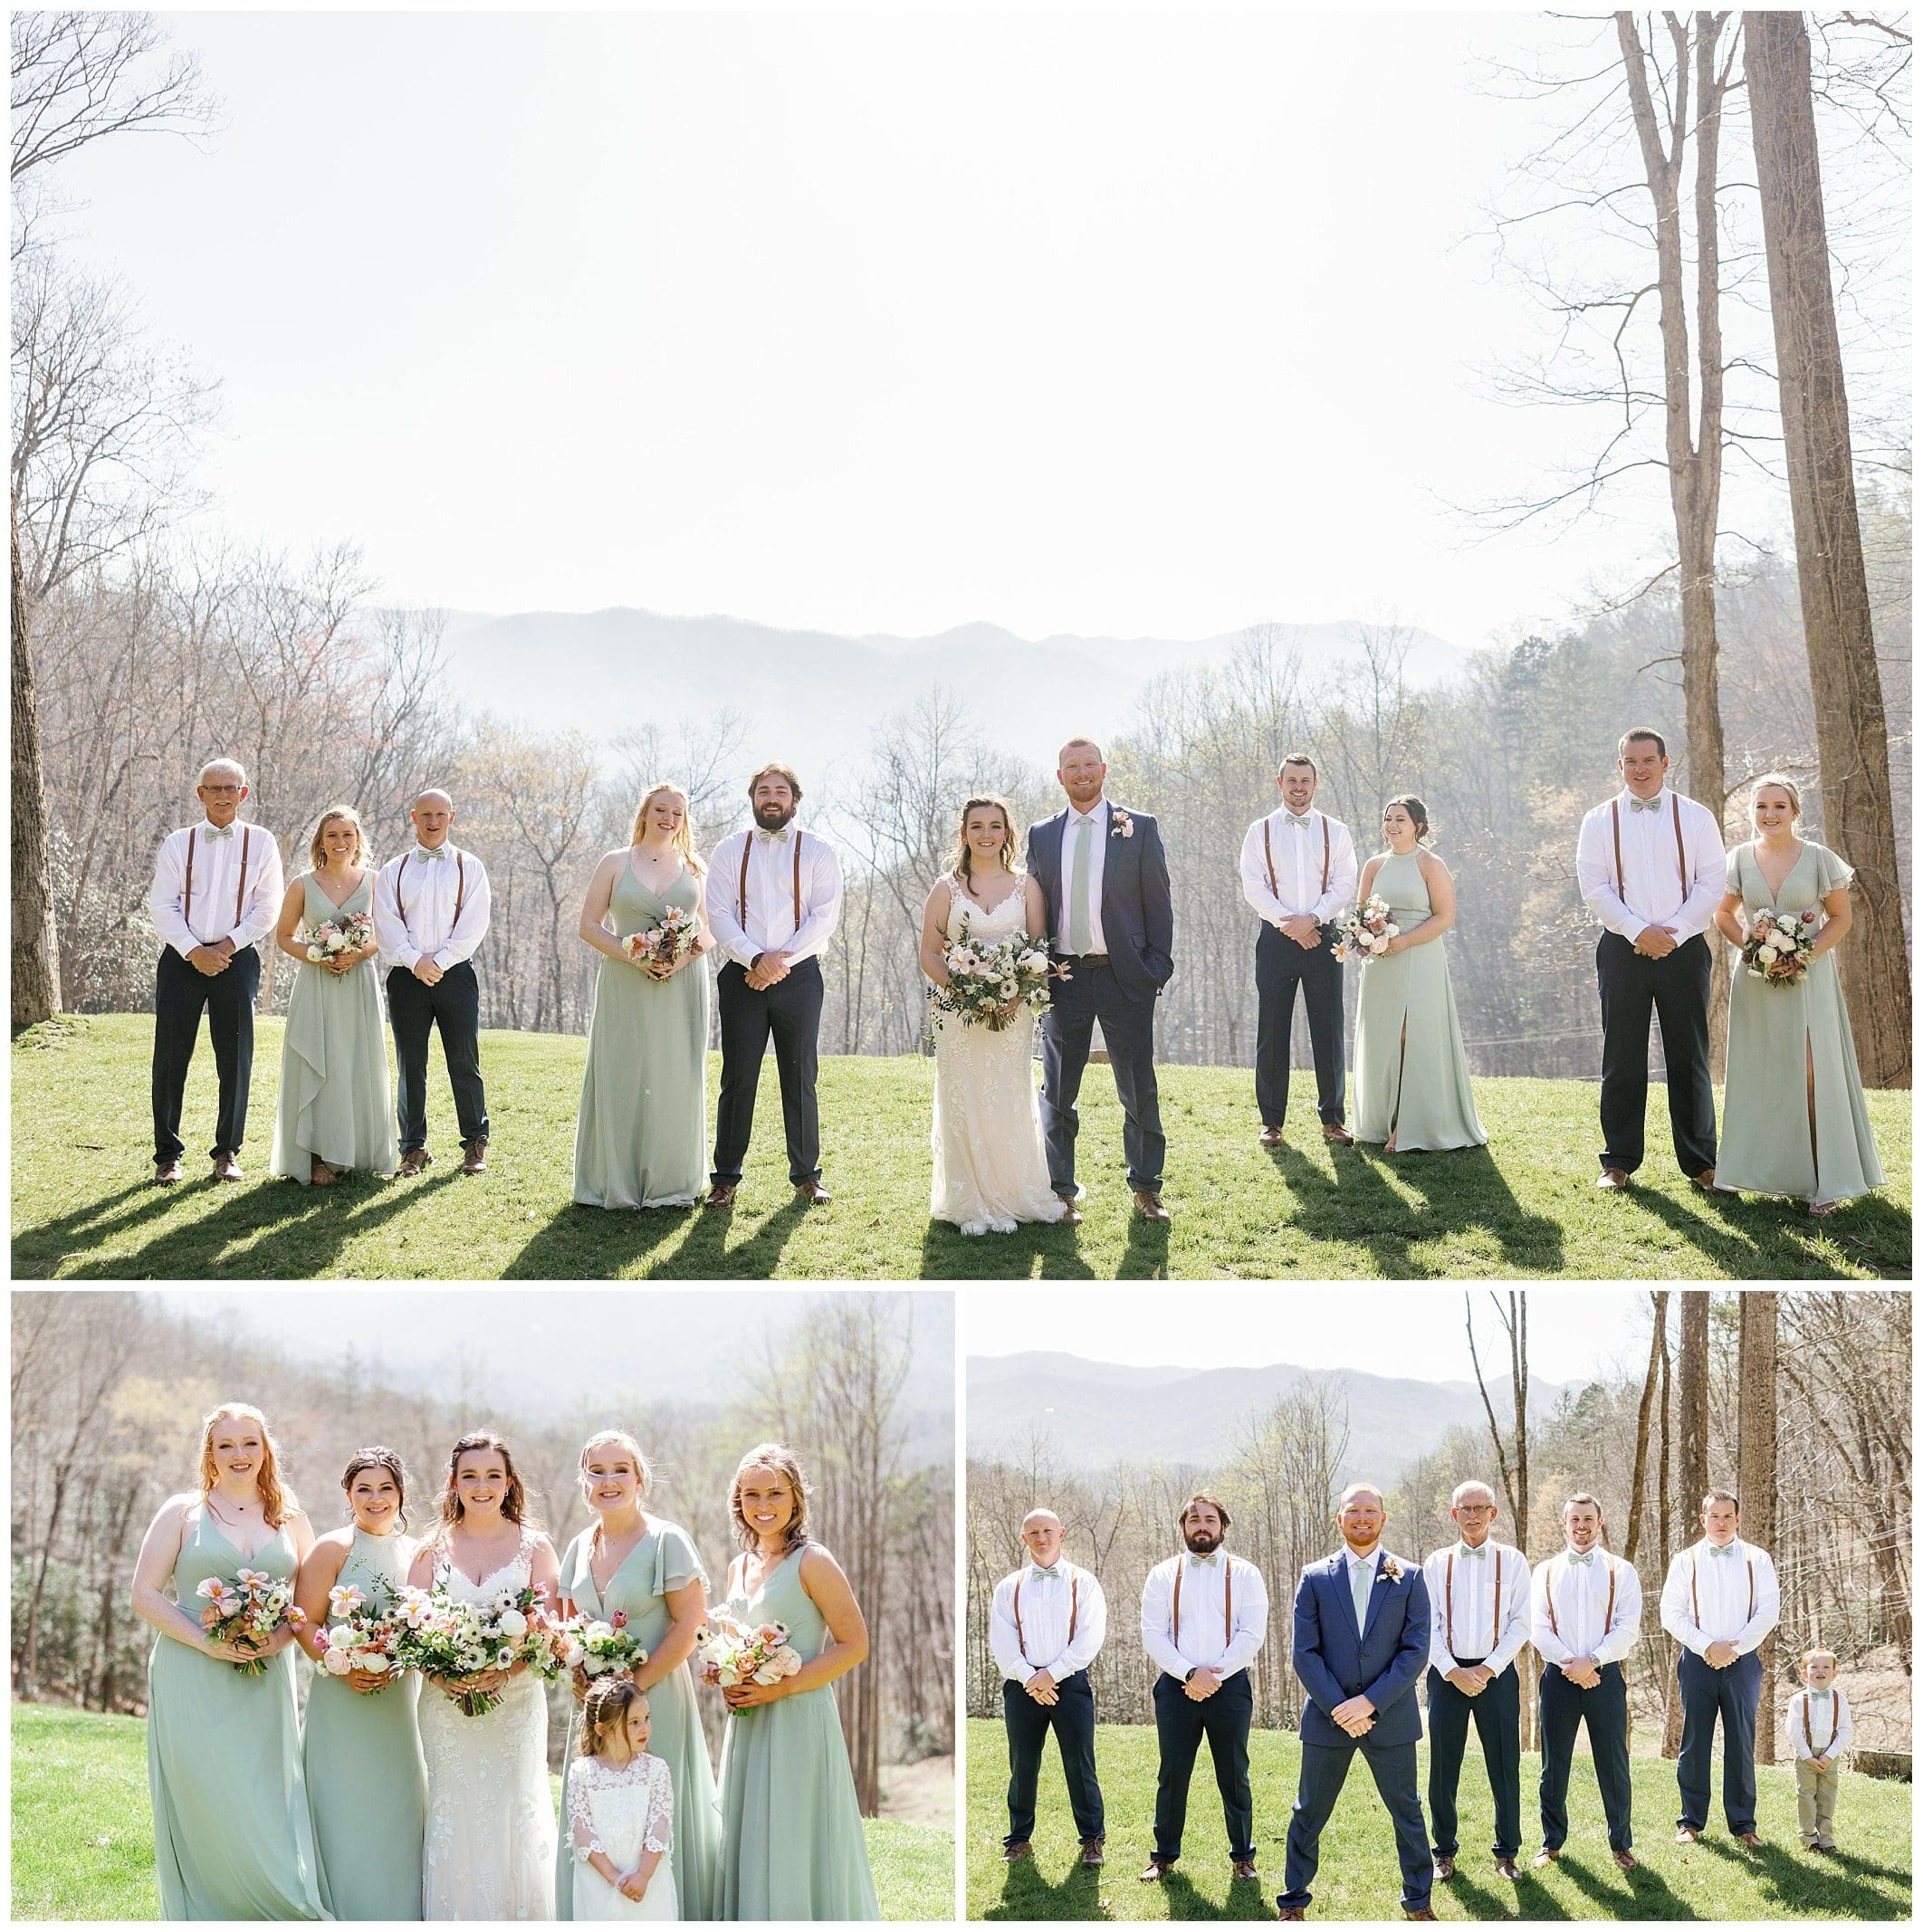 Bridal party photos at spring wedding, light green bridesmaids dressed and spring bouquets with pinks and pops of yellow